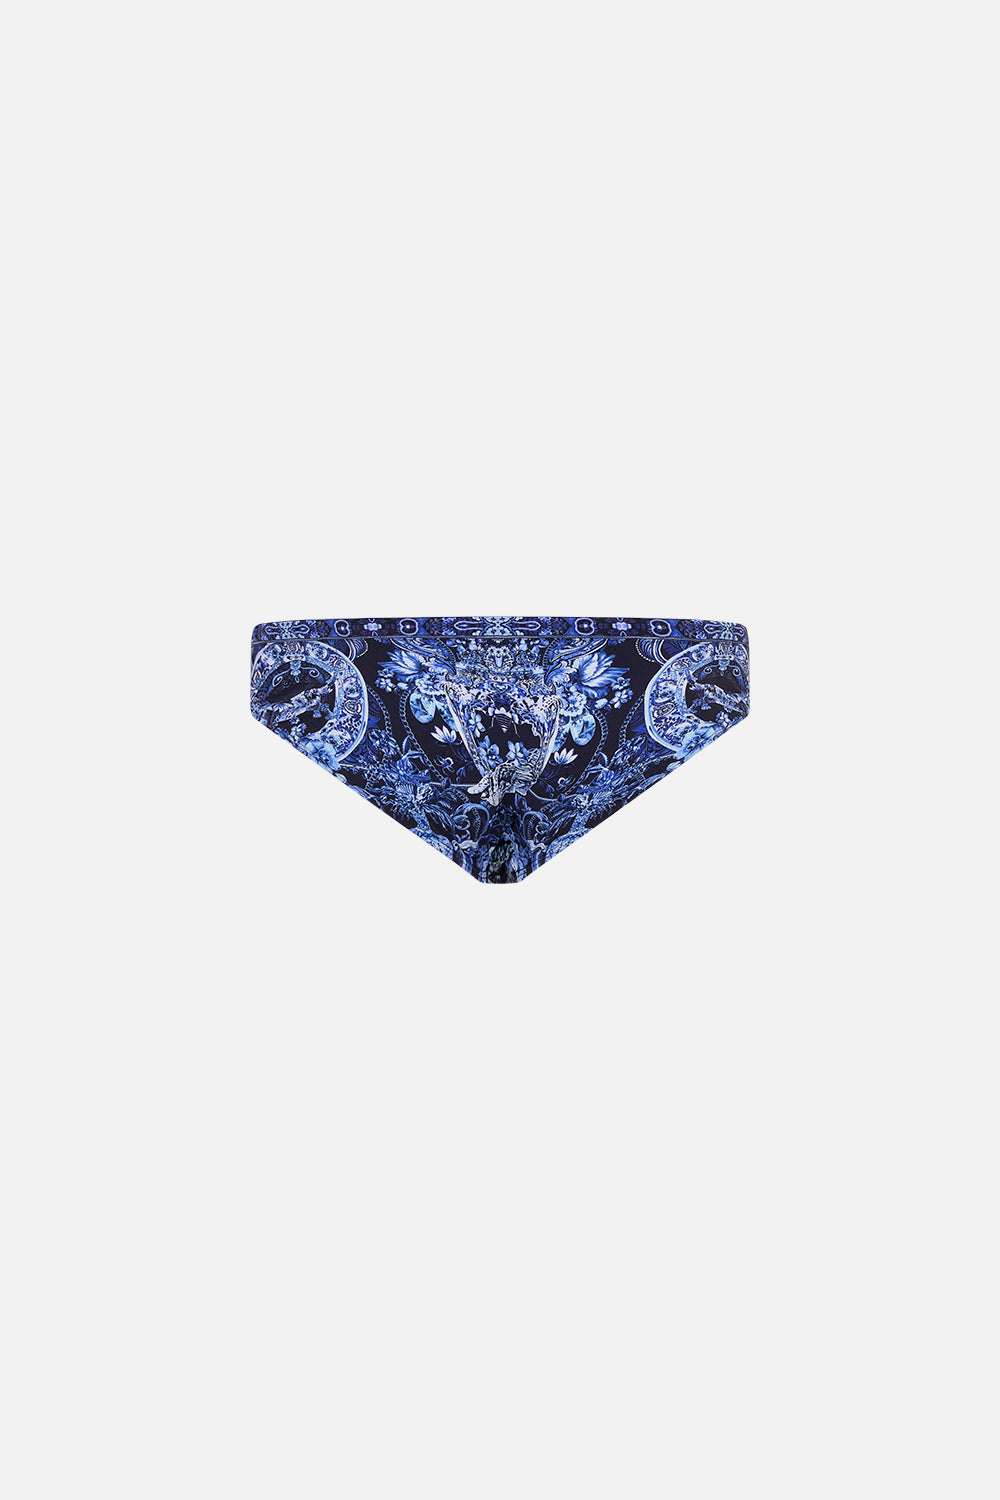 Back product view of Hotel Franks By CAMILLA mens swim brief in Delft Dynasty print